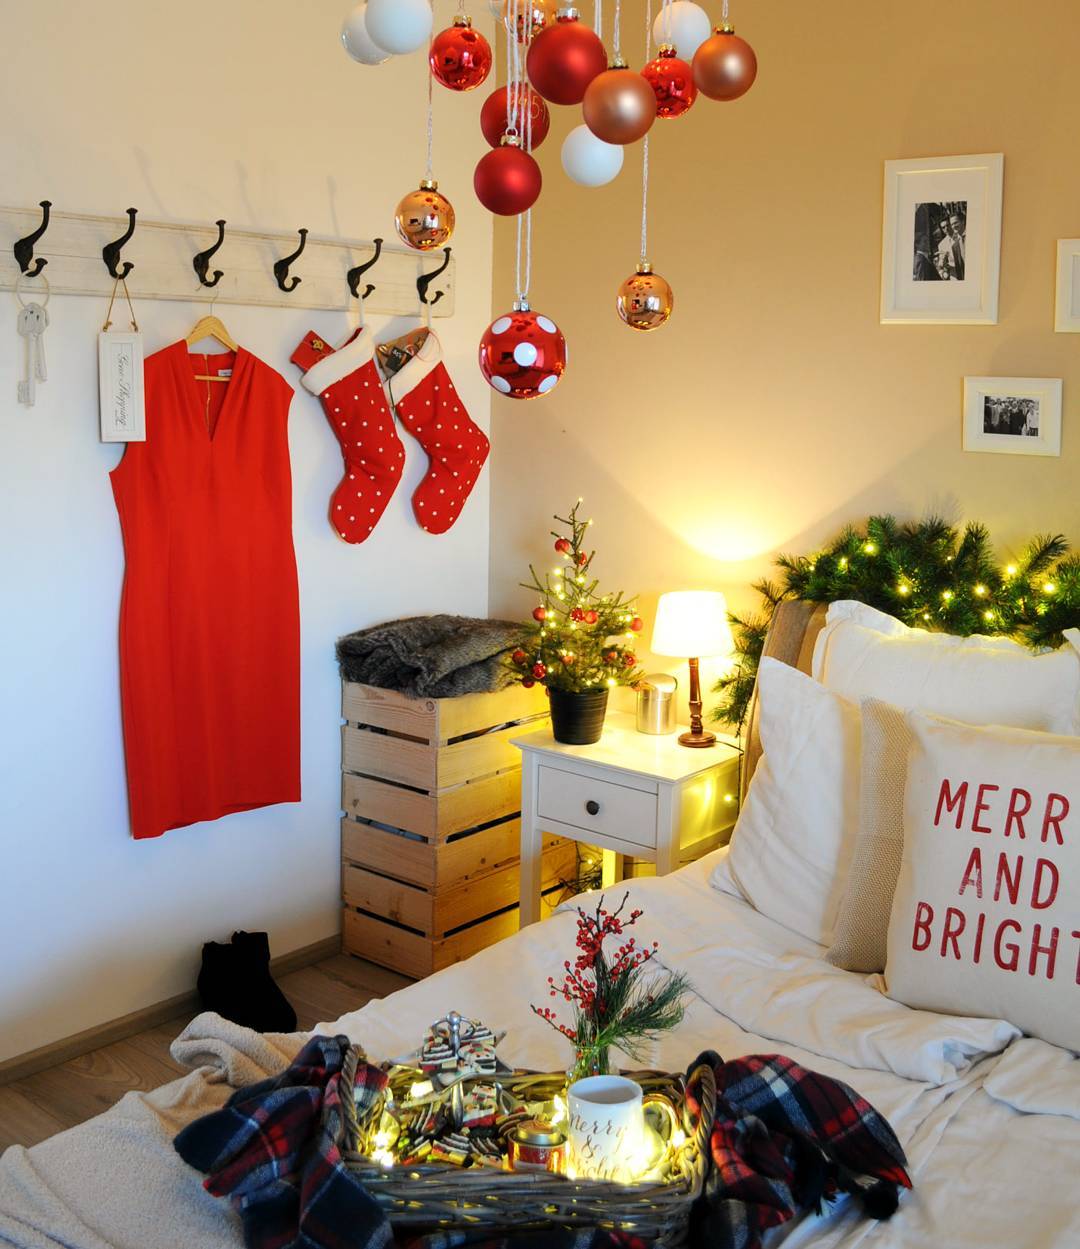 Trendy Bedroom Decoration With Ornaments, Santa Shoes And Accessories